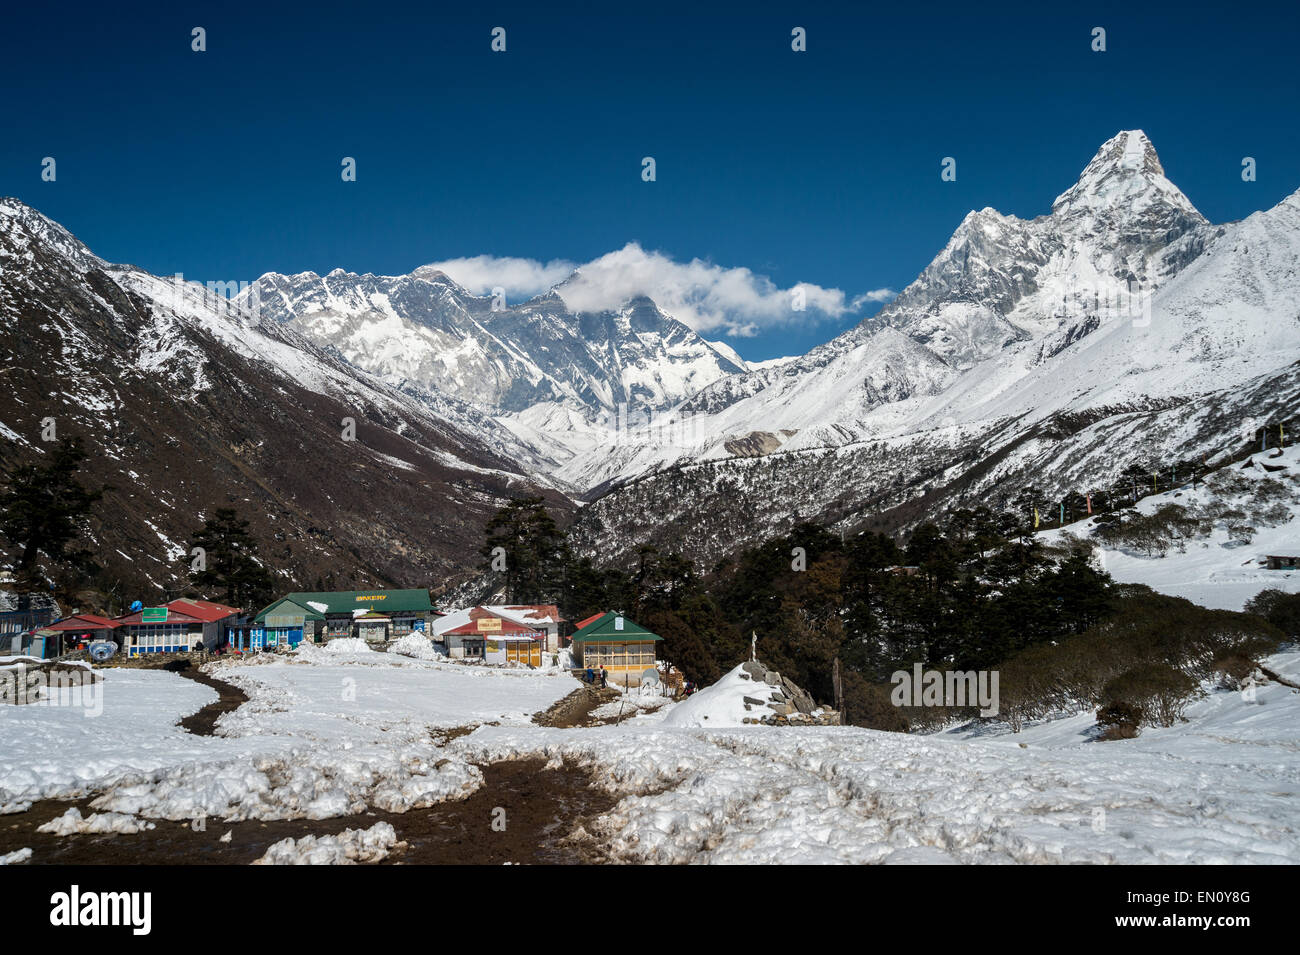 View of Everest, Lhotse, Nuptse, Ama Dablam peaks in the Everest Region, with Deboche village in the foreground Stock Photo